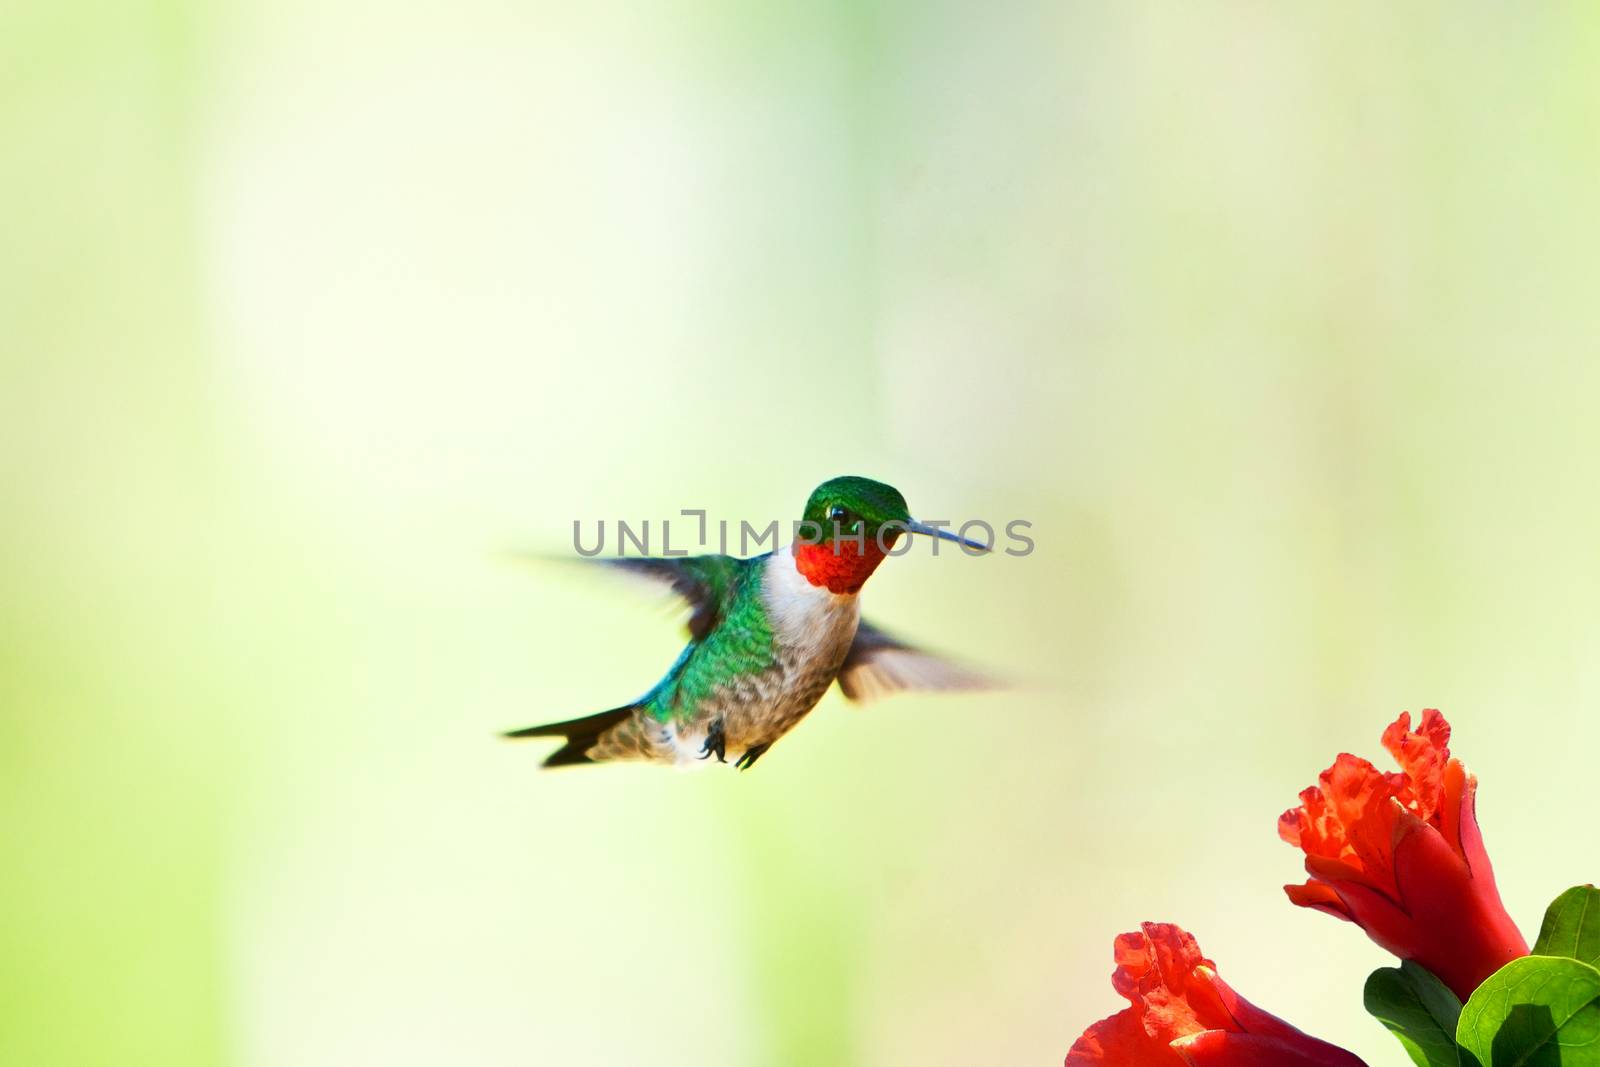 Beautiful male hummingbird with green back and red chest flying towards flower to feed on nectar, on green blurred background.